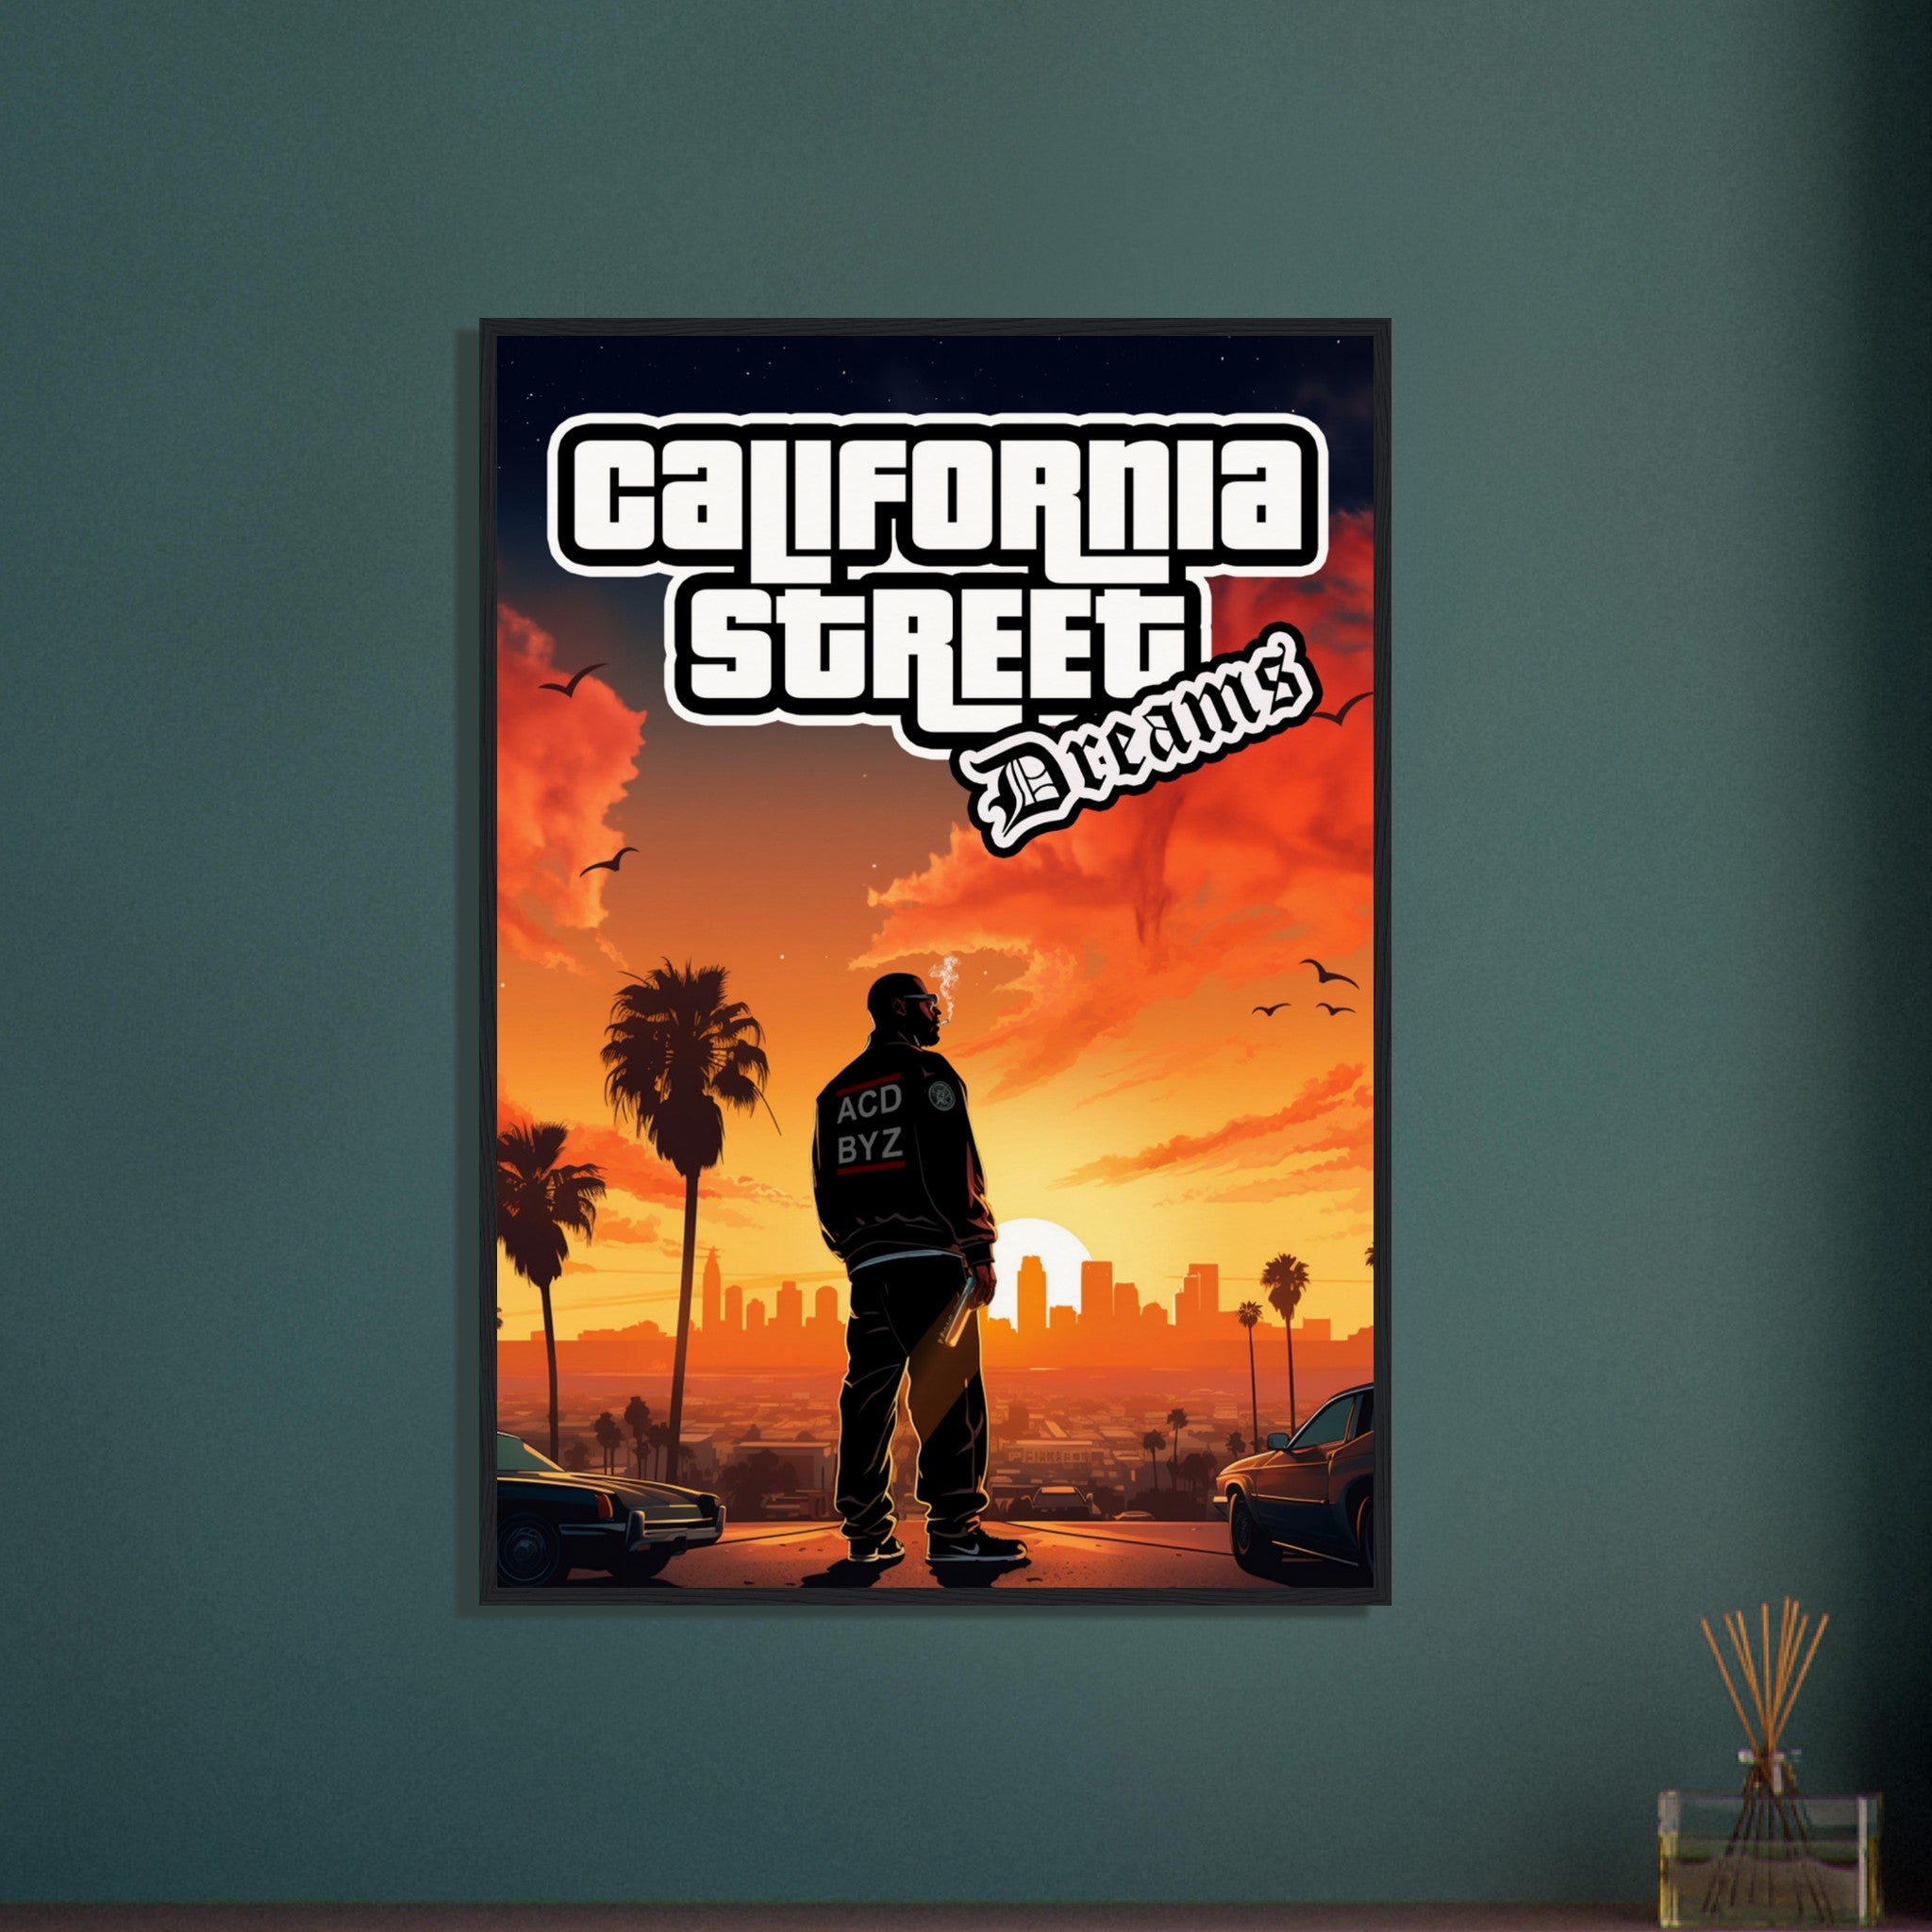 California Street Dreams - Poster in a wooden frame